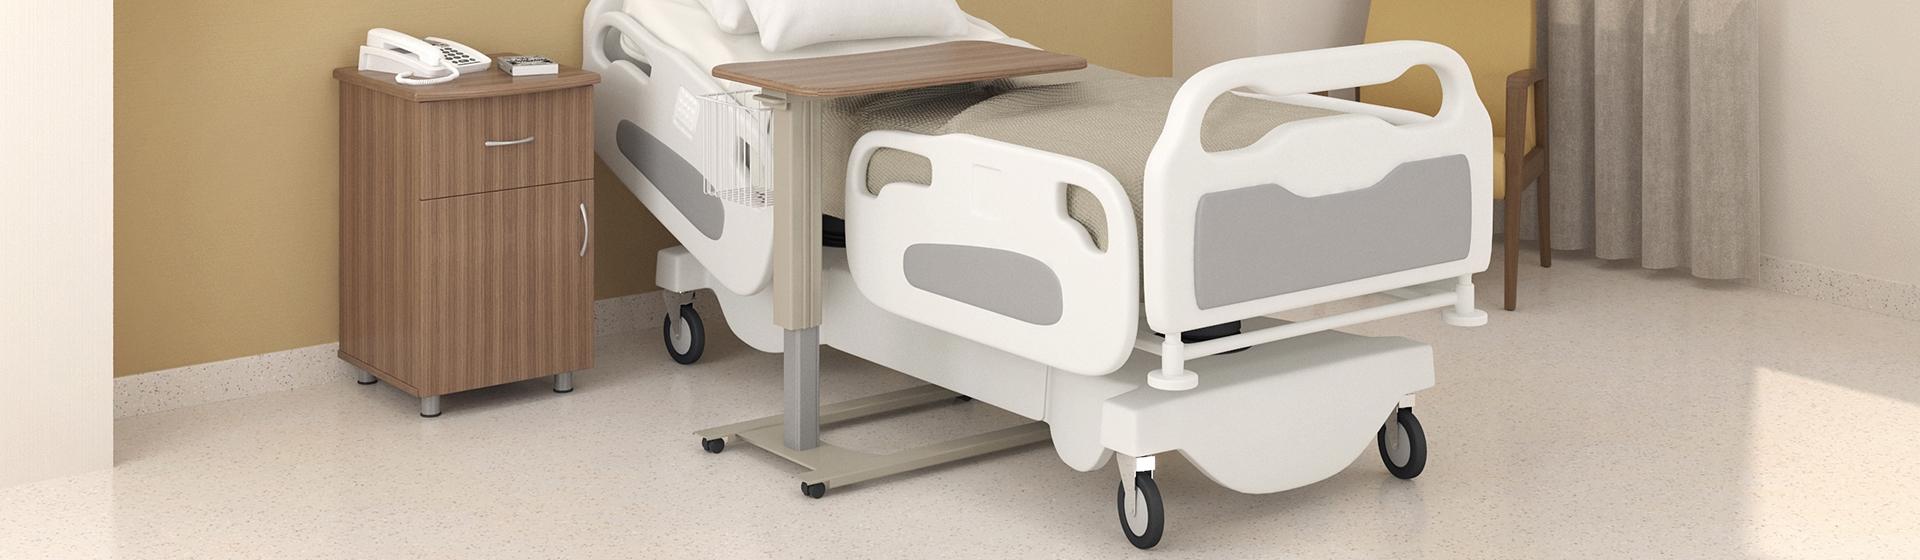 Overbed table in a patient room